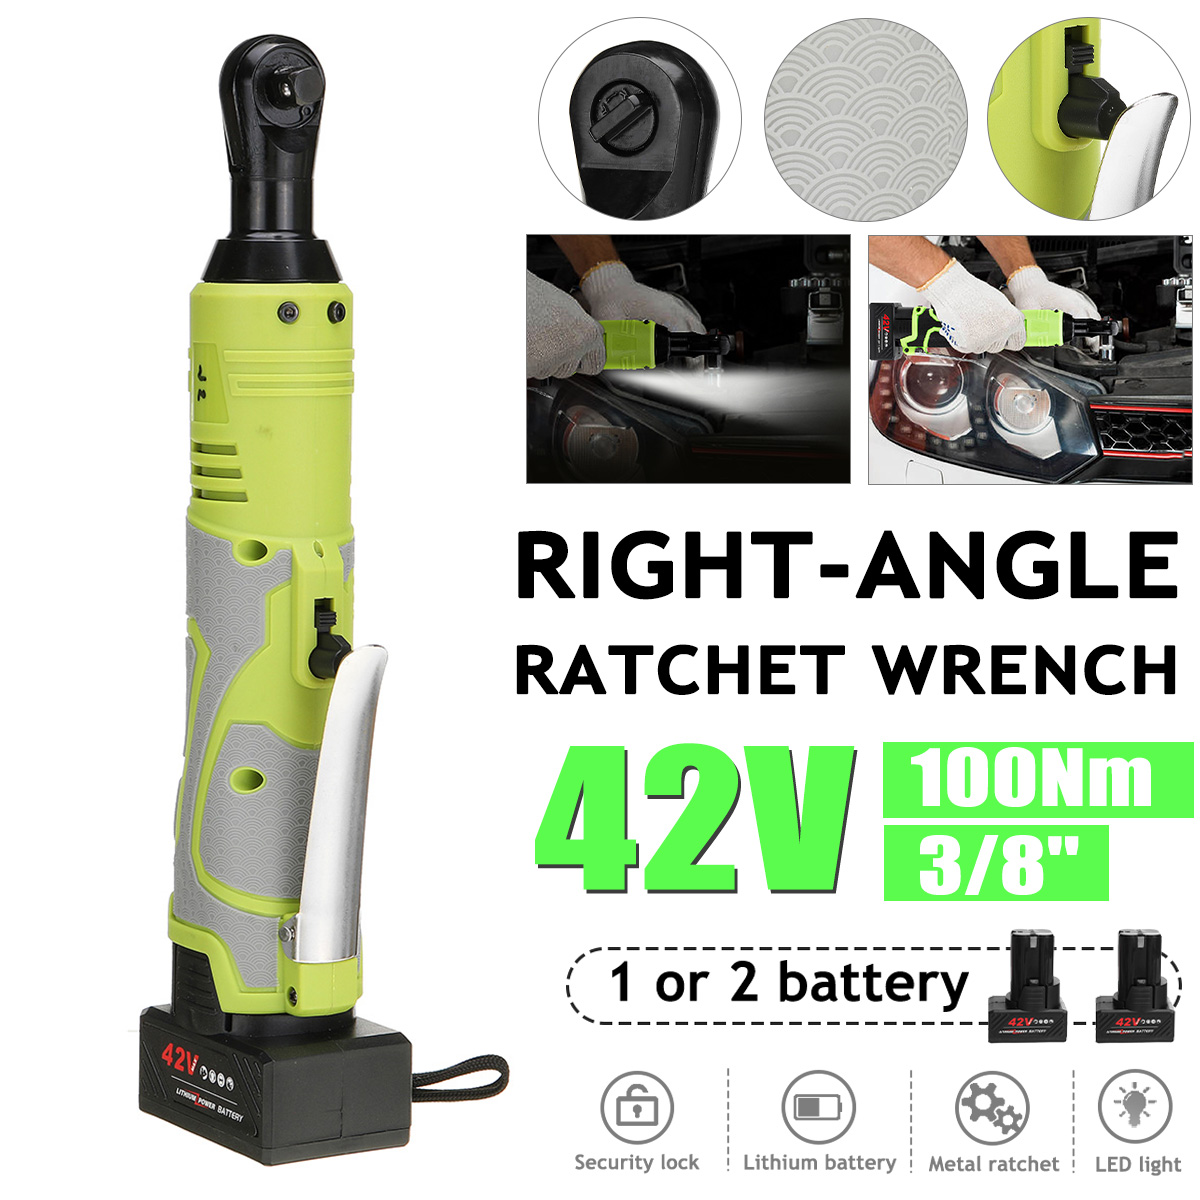 42V-Cordless-Electric-Ratchet-Right-Angle-Wrench-38-100Nm-Torque-LED-Light-1714976-2